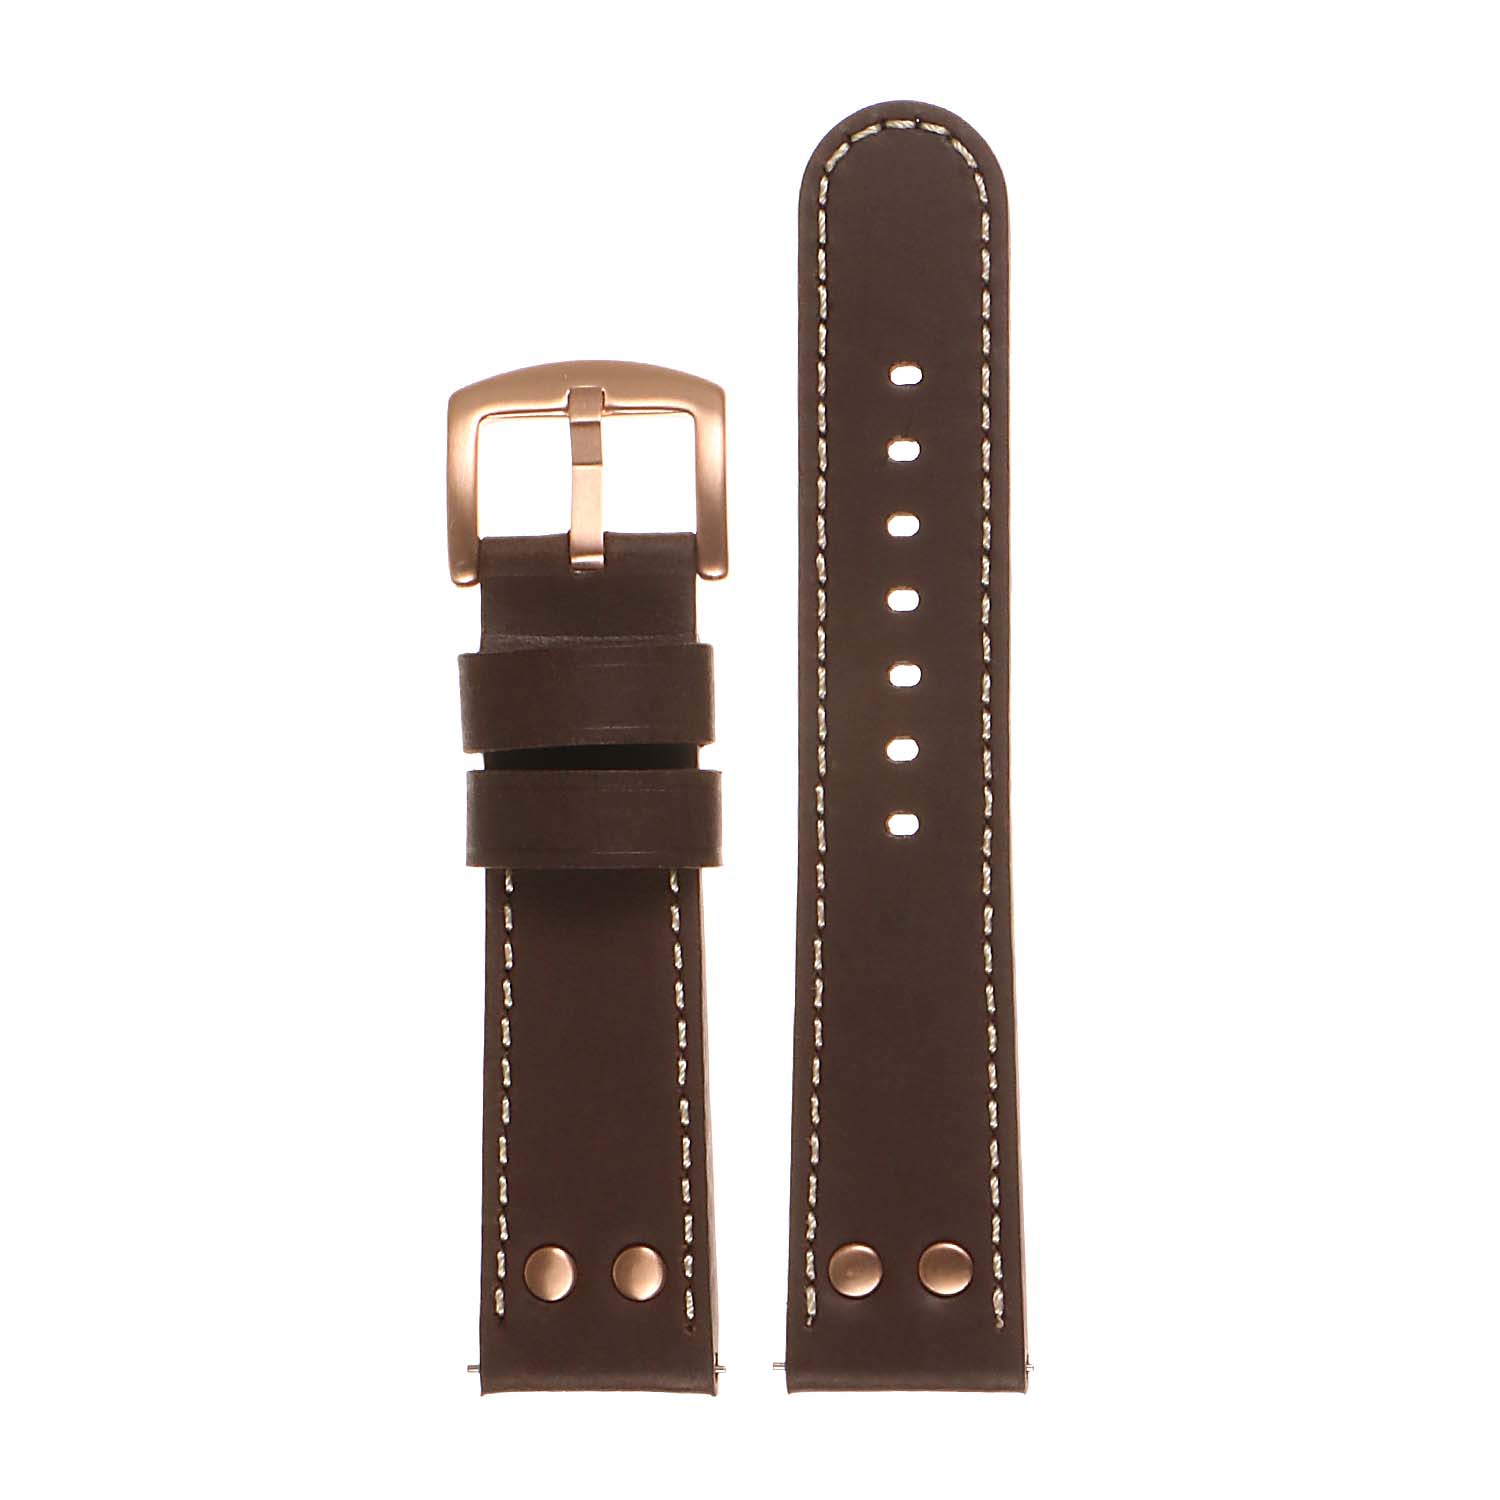 DASSARI Leather Pilot 22mm Watch Band Strap for LG G Watch W100 - Brown (Rose Gold Buckle)